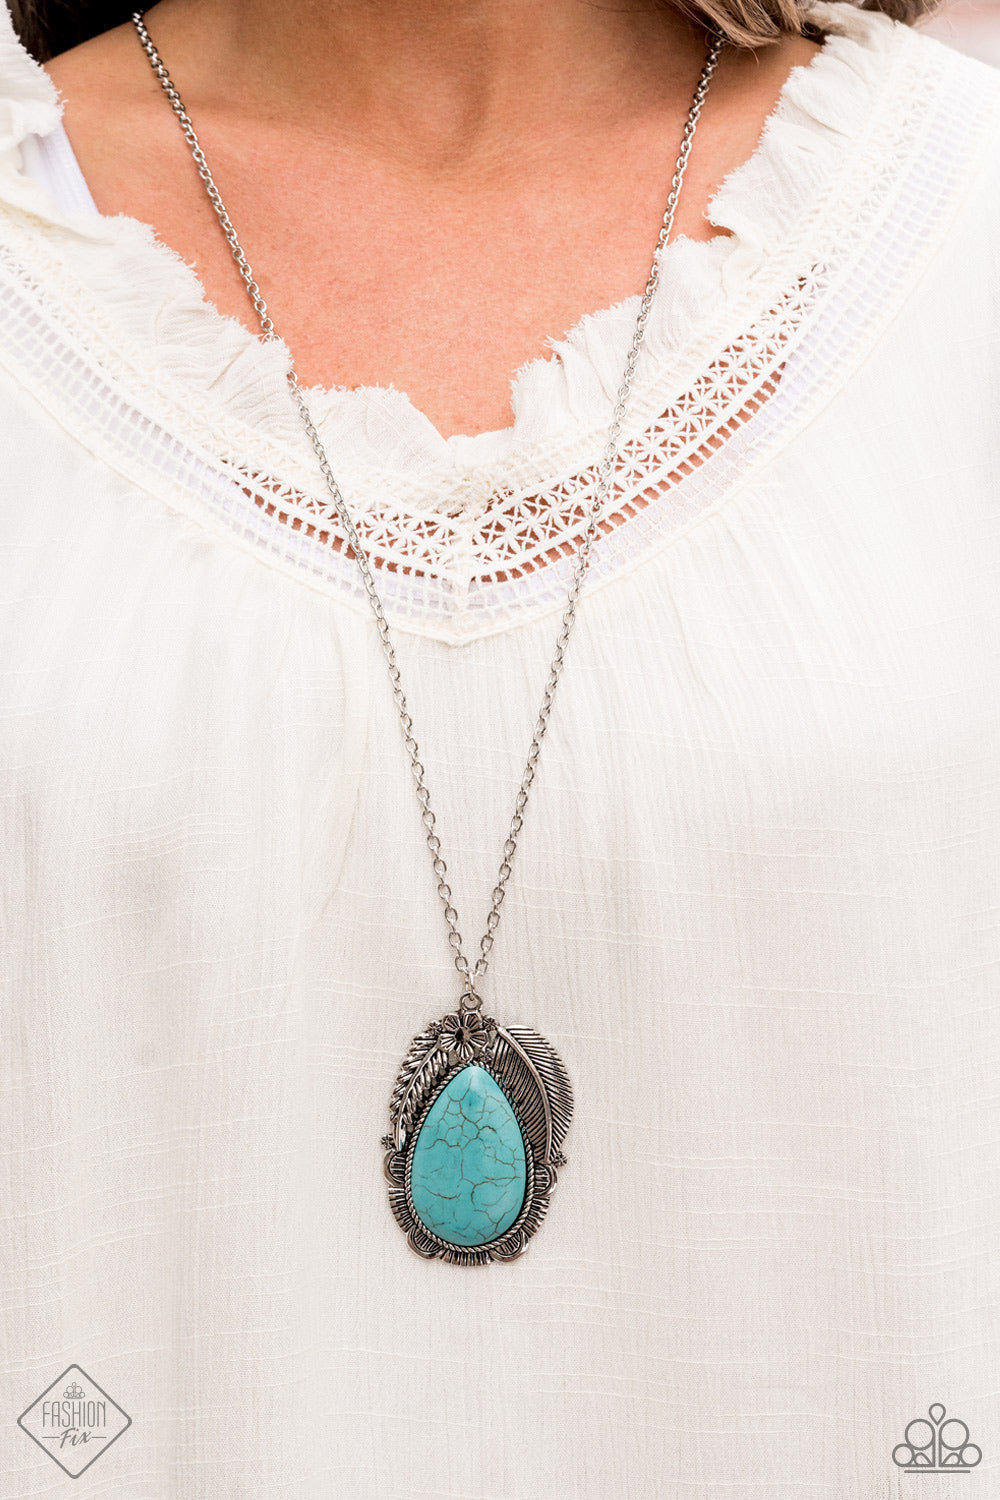 Tropical Mirage - Blue/Turquoise necklace